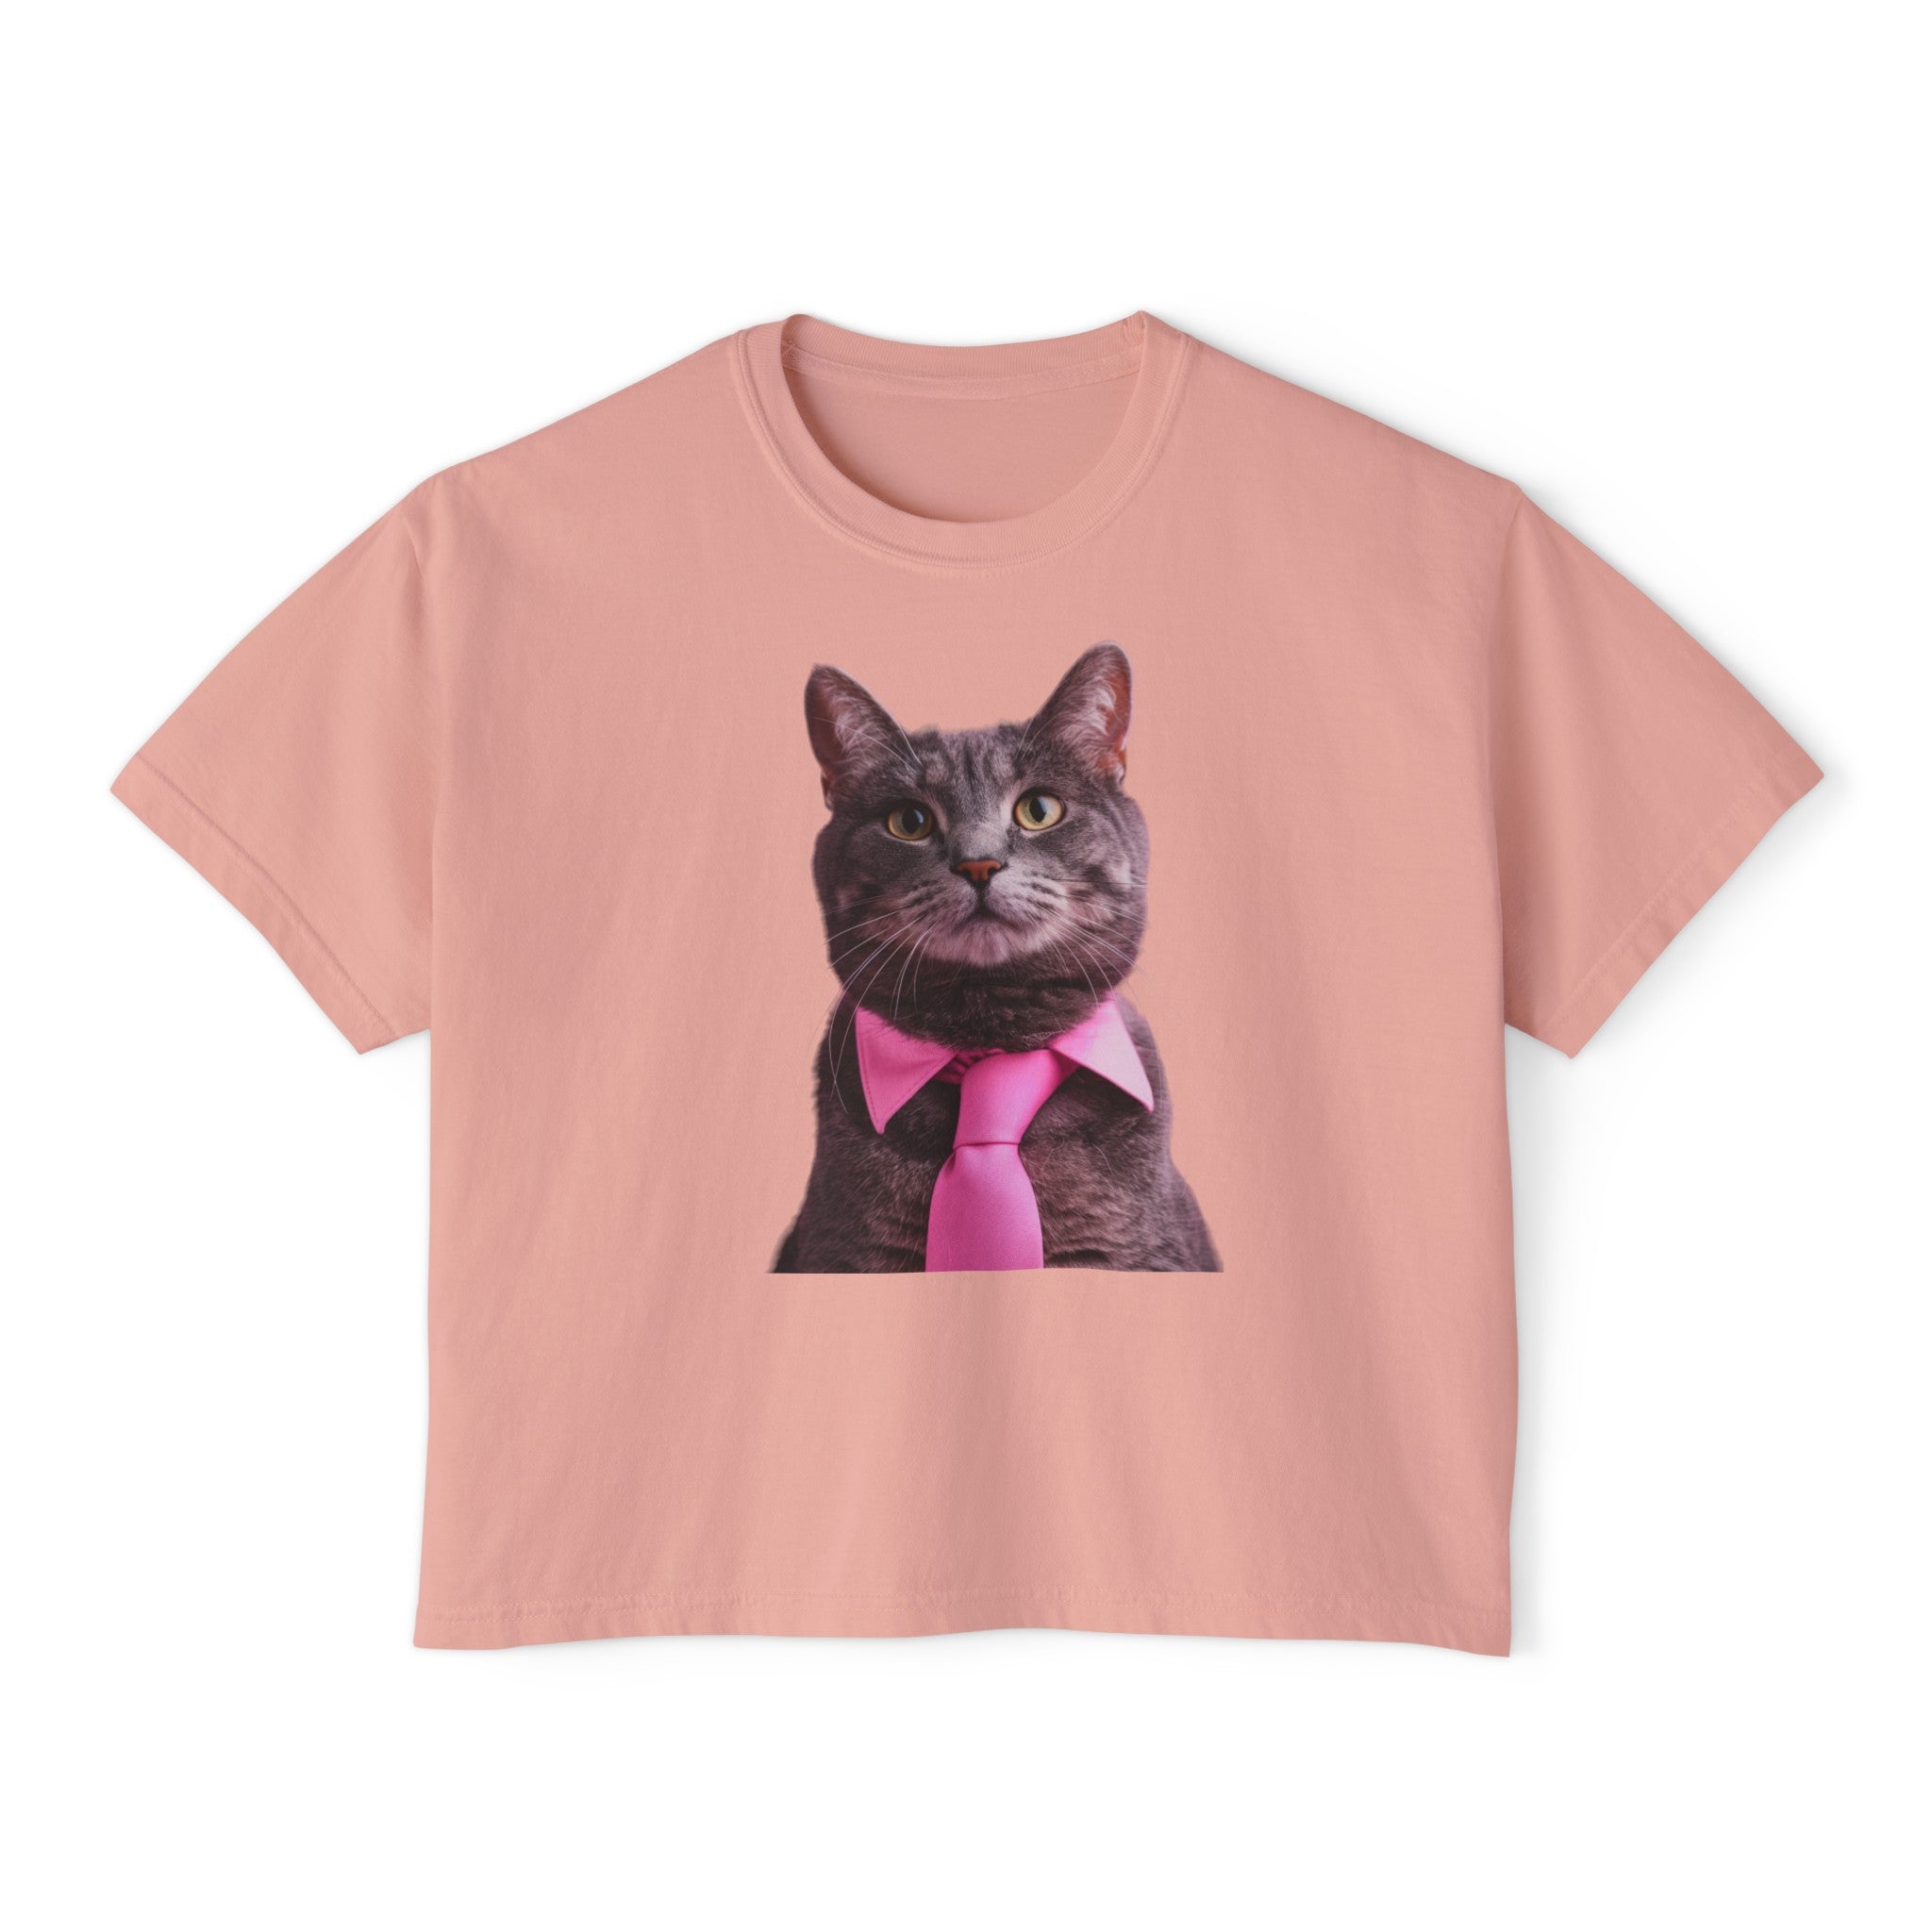 The image features a trendy women's boxy tee in a light, appealing color. It showcases a detailed, artistic illustration of a tabby cat wearing a pink tie, perfectly positioned to catch the eye and evoke smiles. The fabric's quality and the tee's stylish cut are evident, promising a fashionable and comfortable addition to any wardrobe.